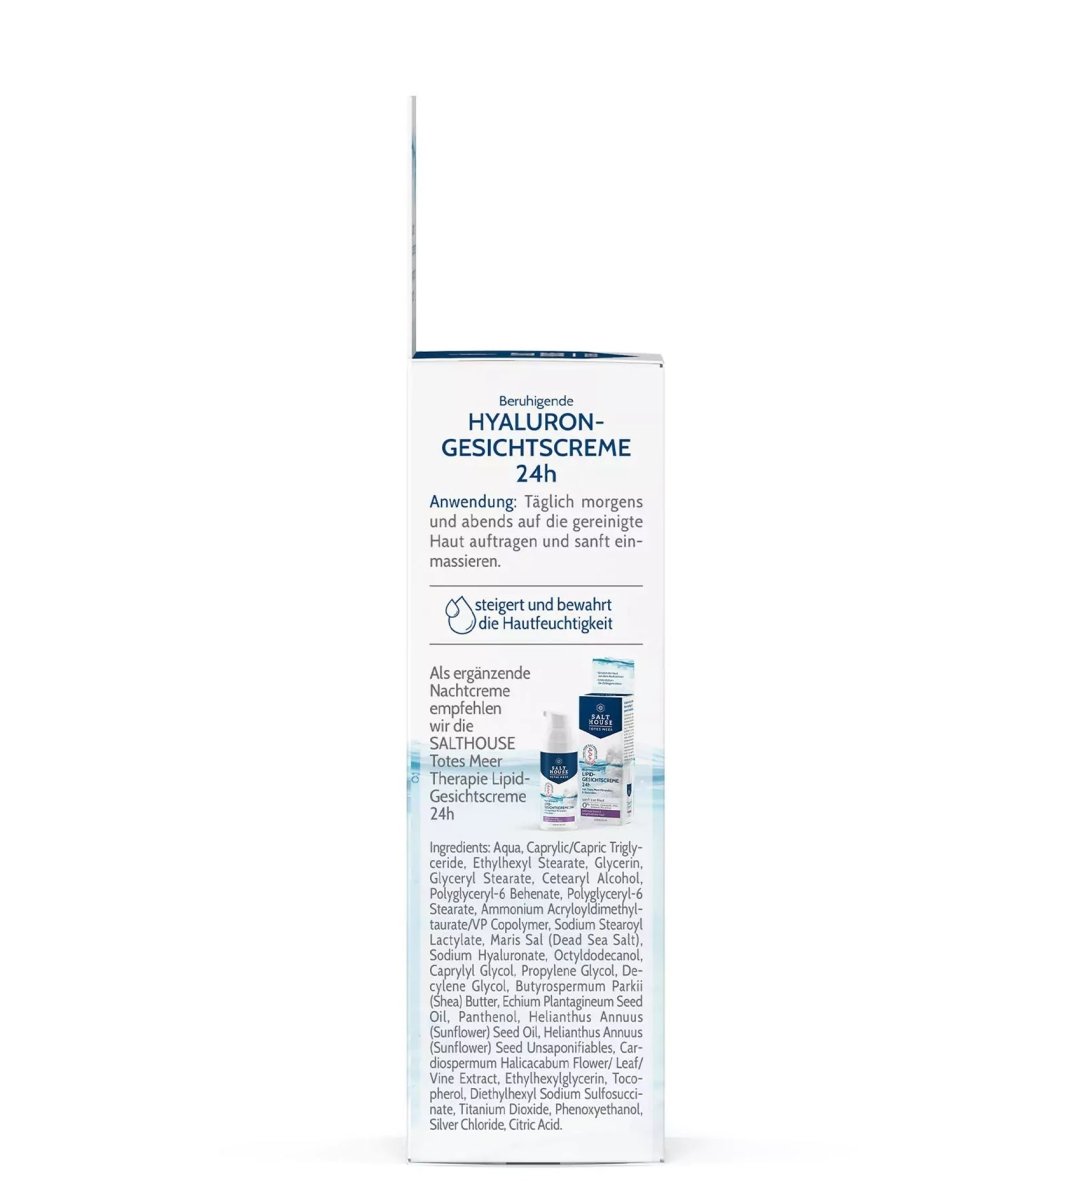 SALTHOUSE® Original Totes Meer Therapie | Hyaluron Gesichtscreme 24h | 50ml